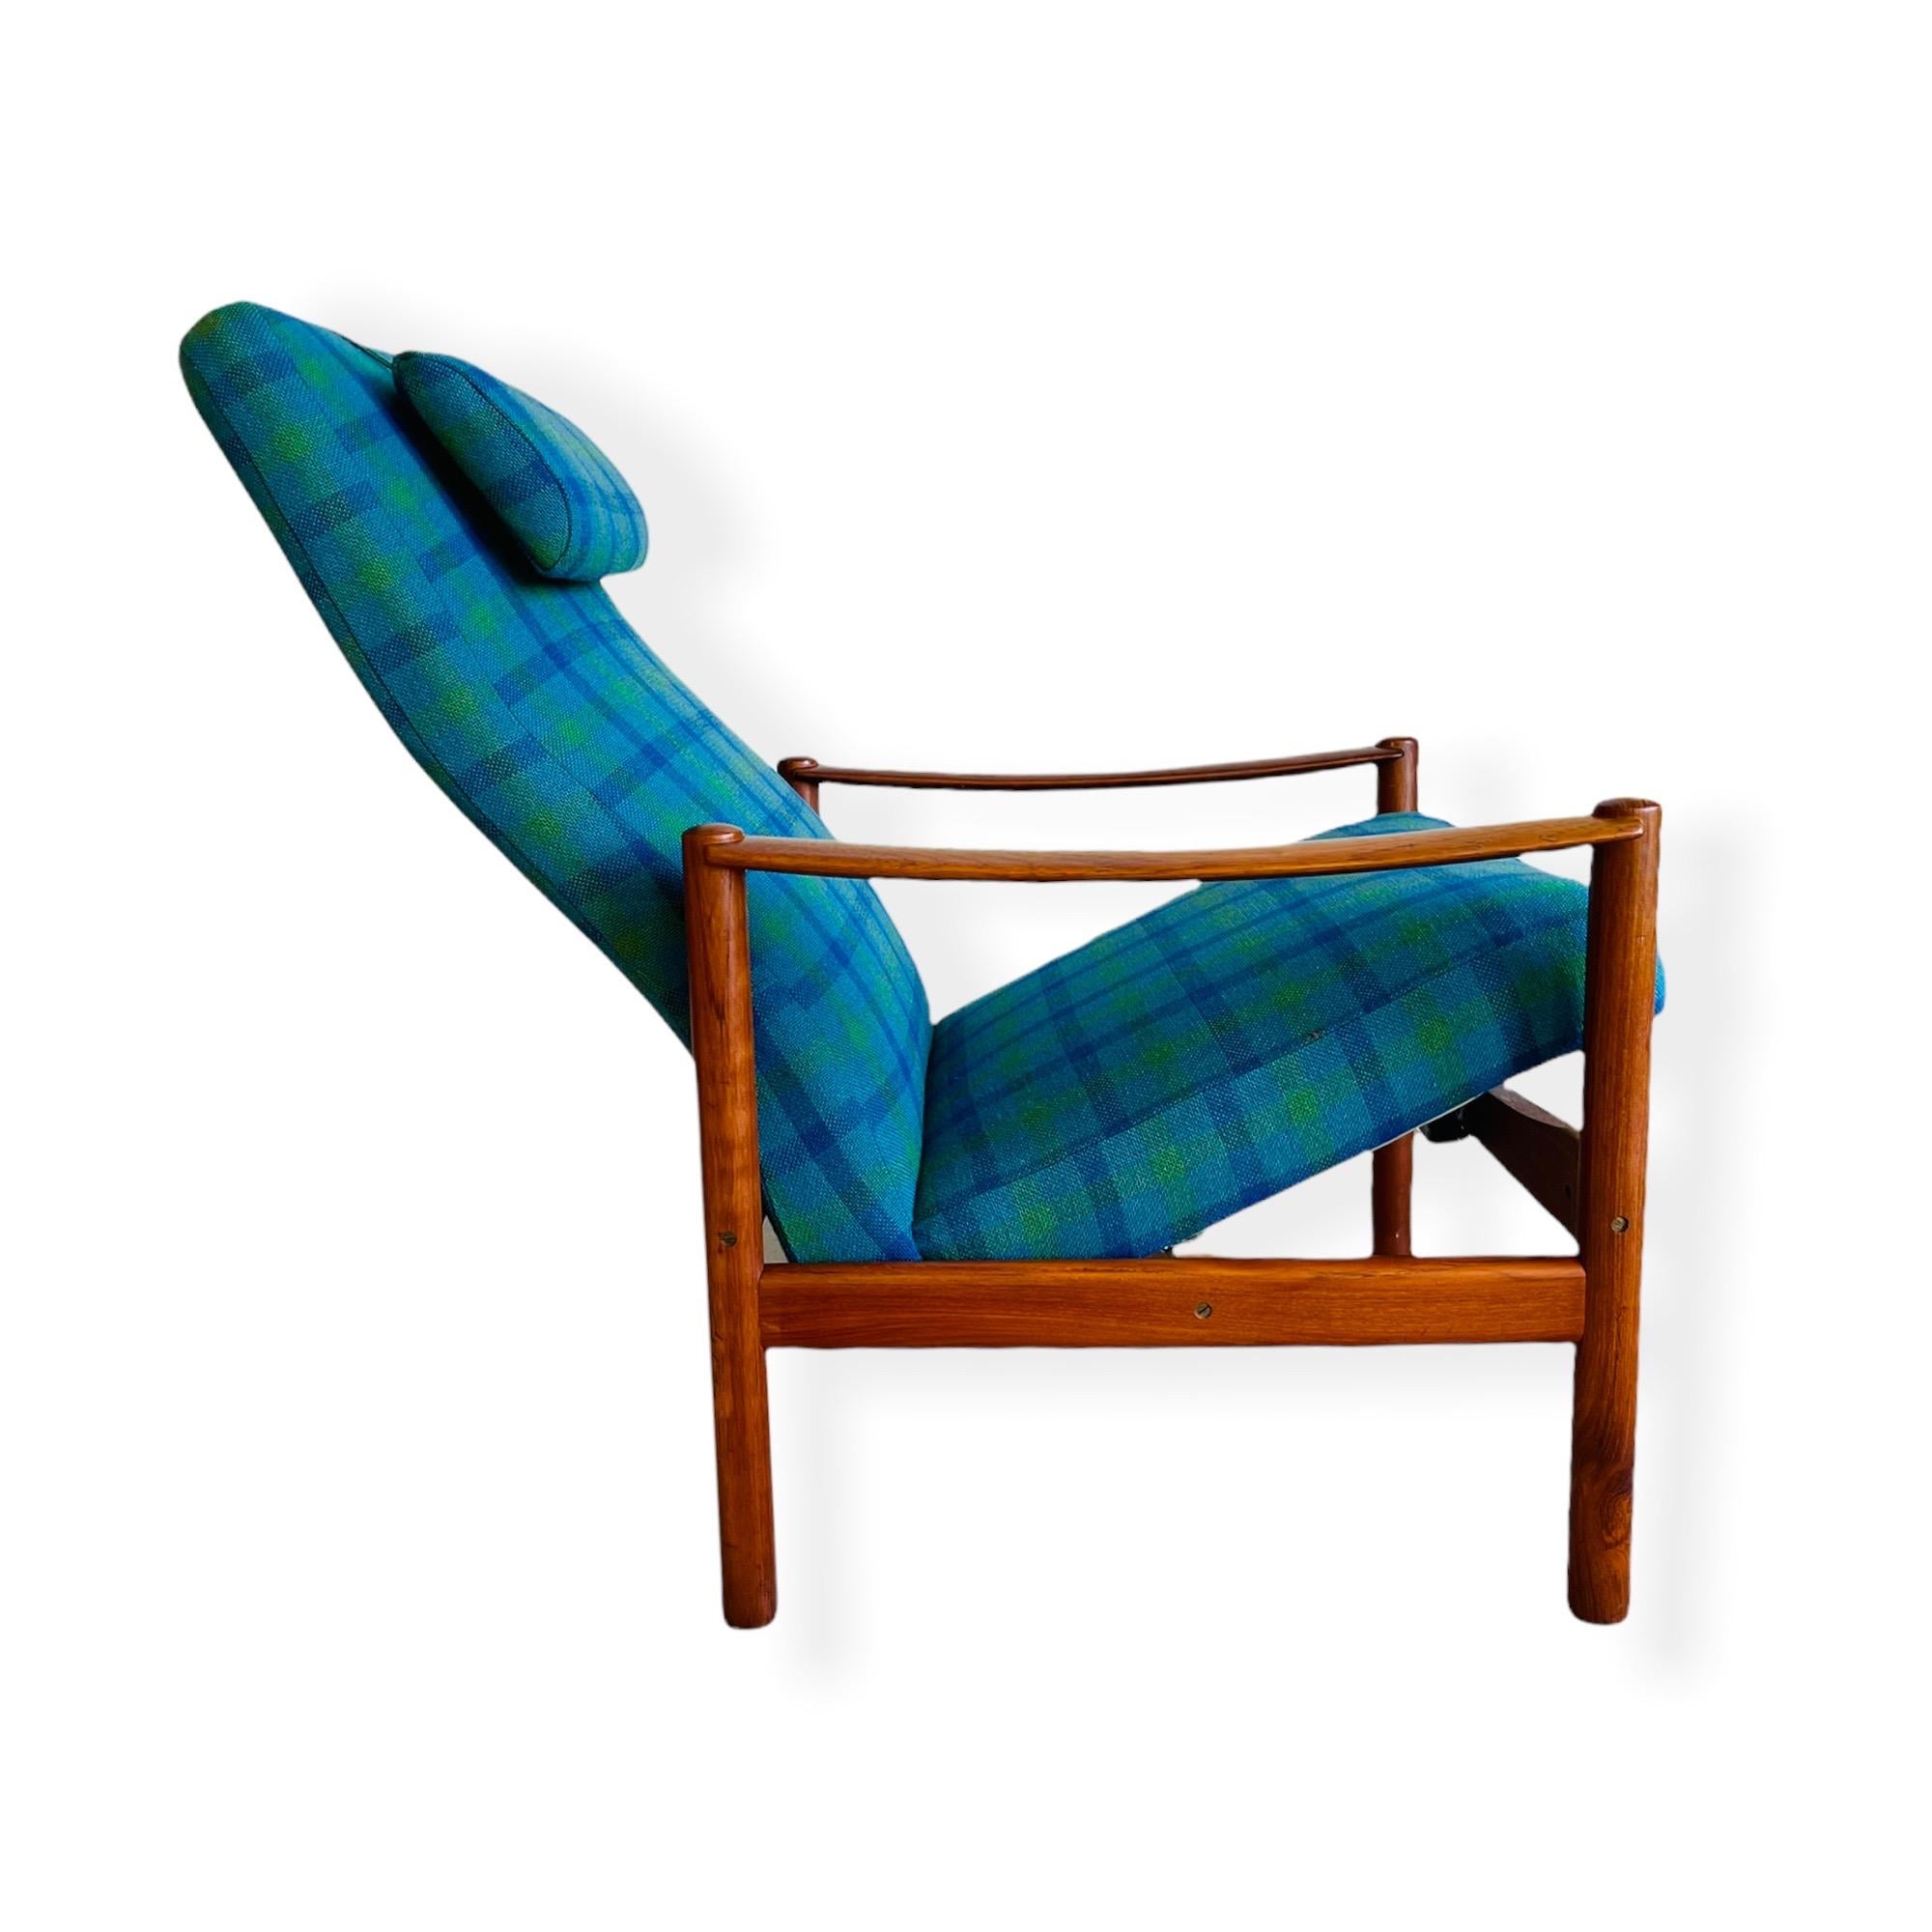 An attractive Mid-Century Modern recliner chair by Westnofa of Sweden. The chair is made of beautiful teak wood and original upholstery that’s in good condition. This chair has a simple lines and will be a great addition to any room or office. The